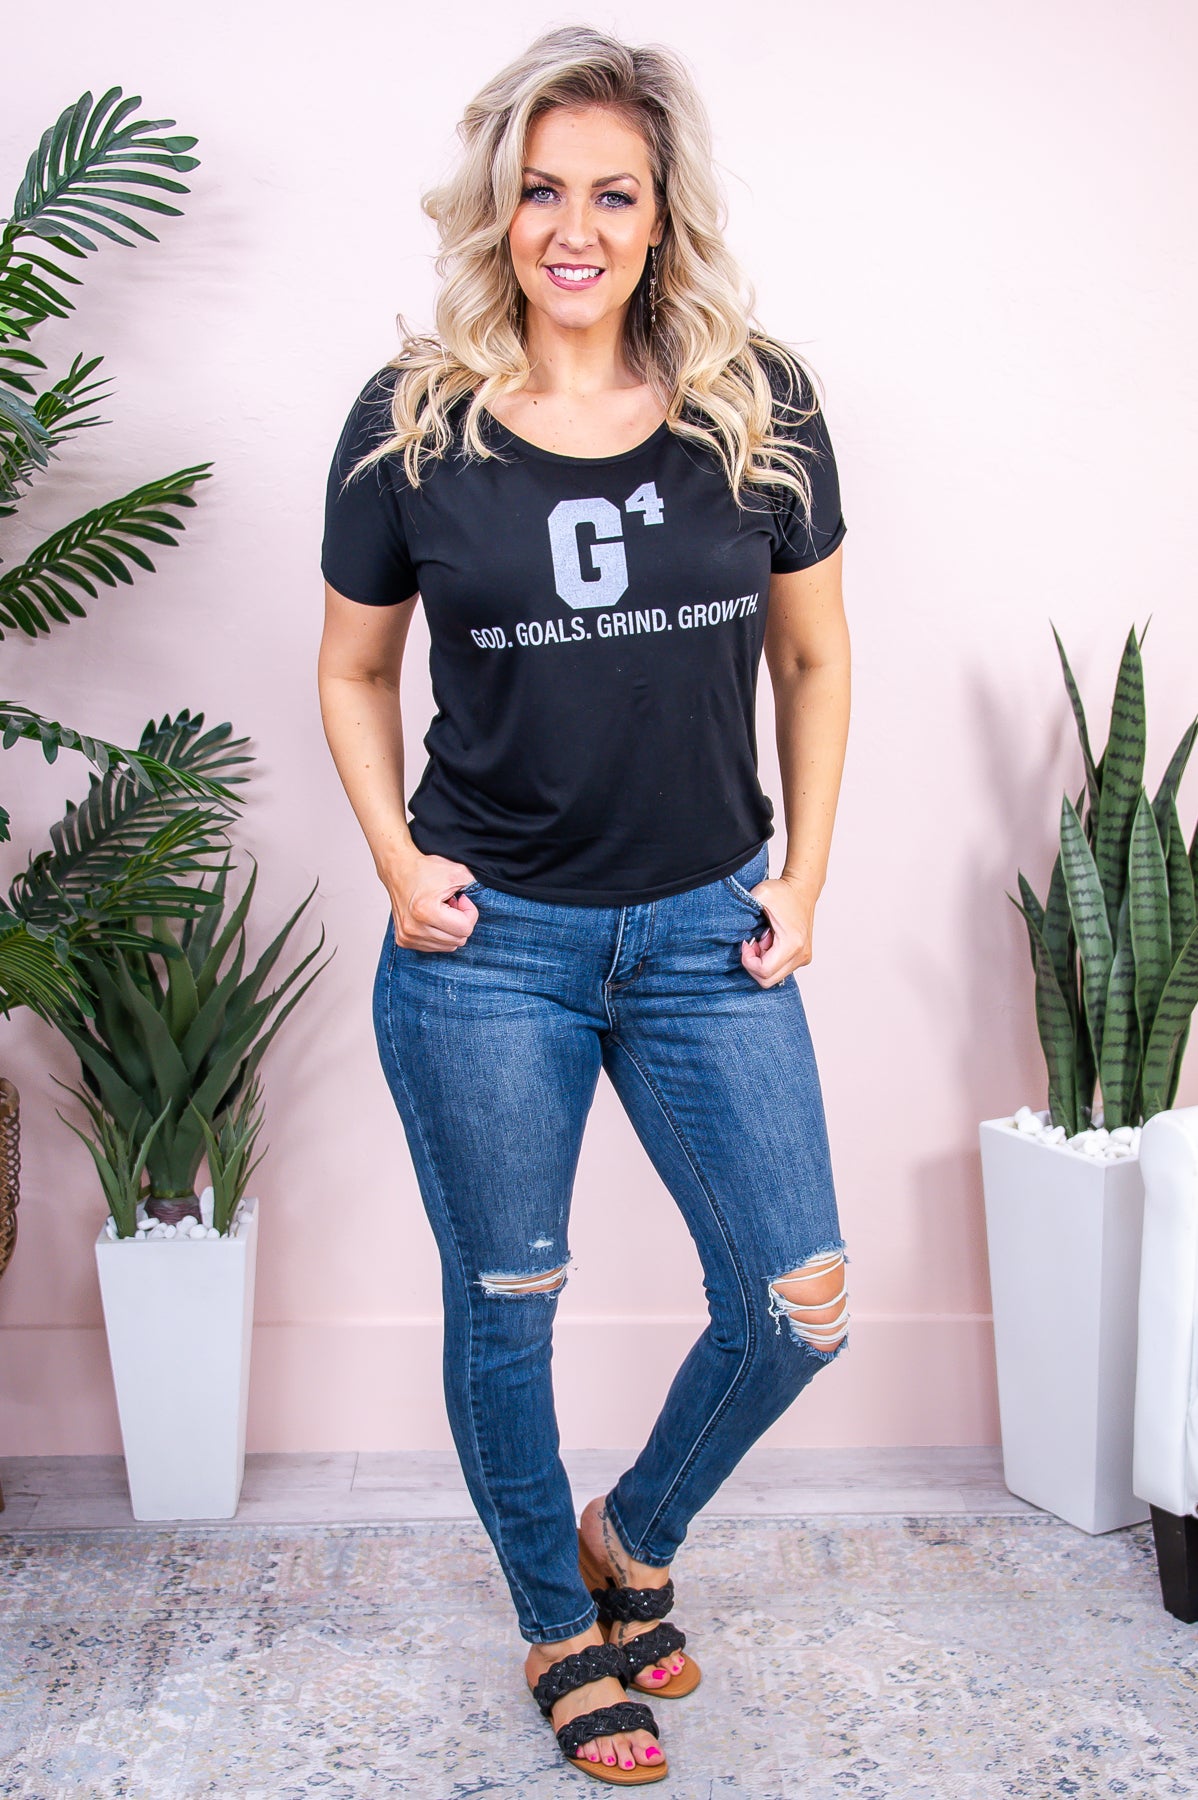 G4 Black Slouchy Graphic Tee - A3182BK